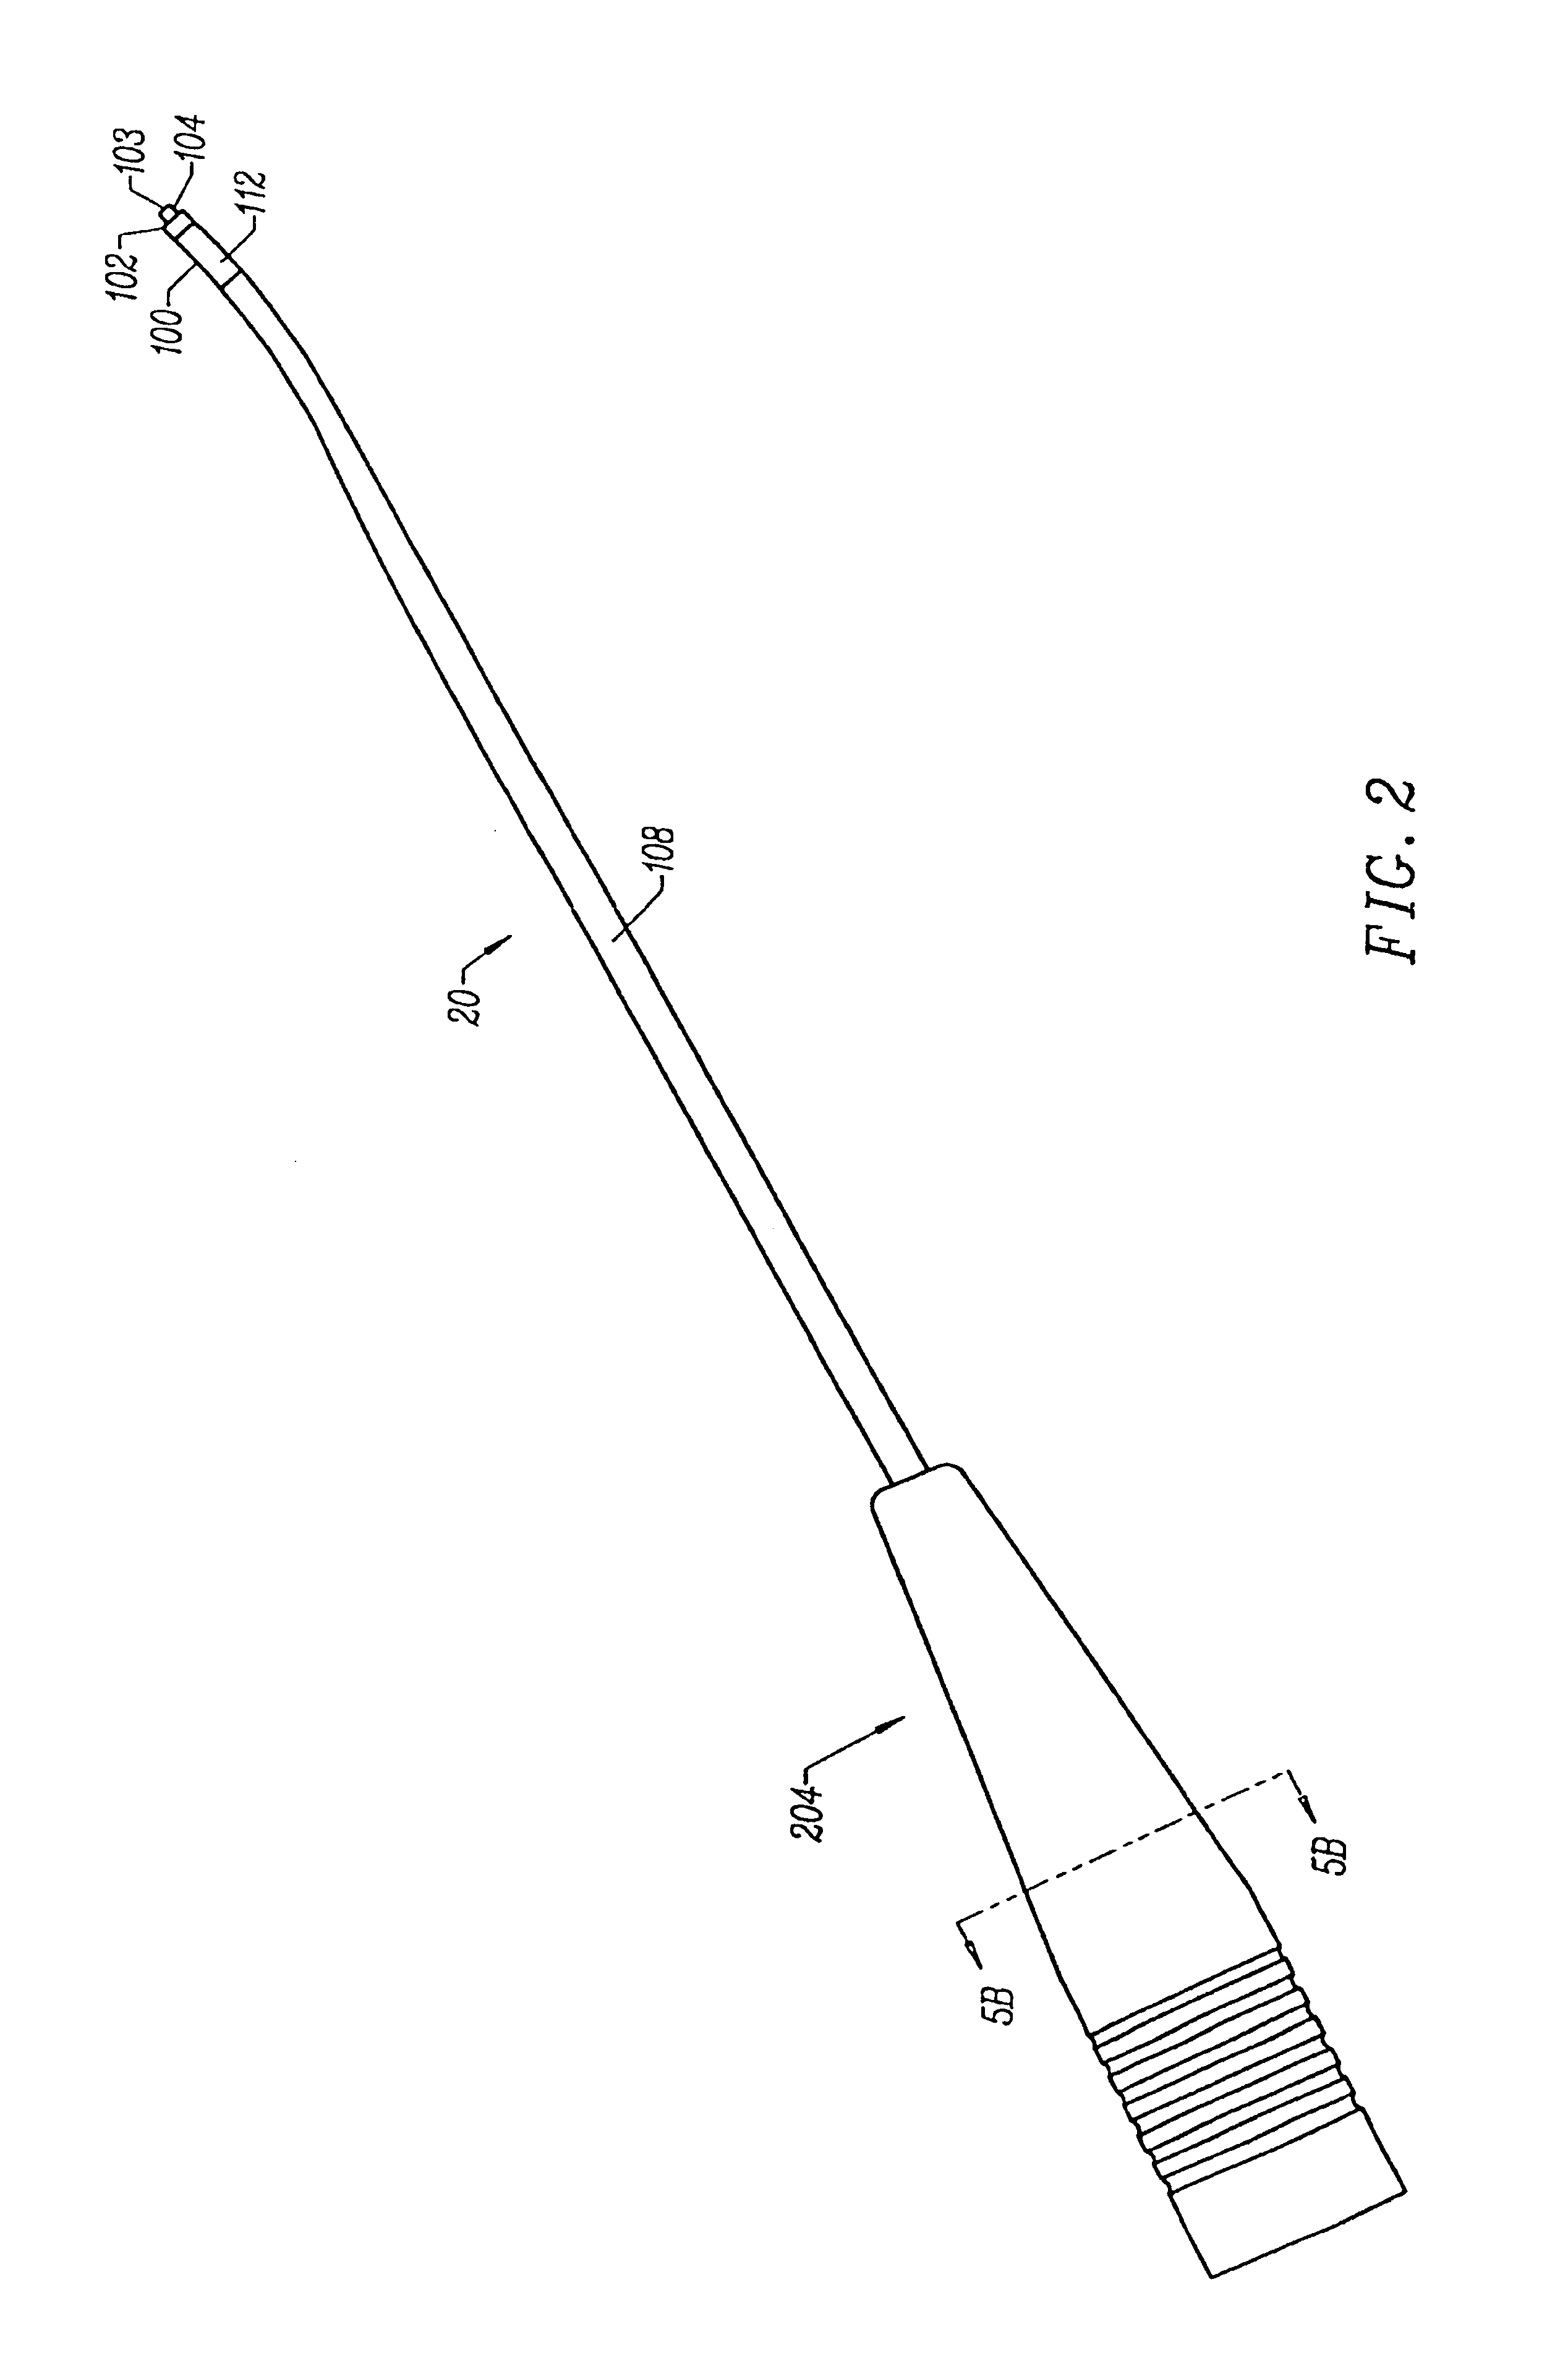 Electrosurgical apparatus having digestion electrode and methods related thereto